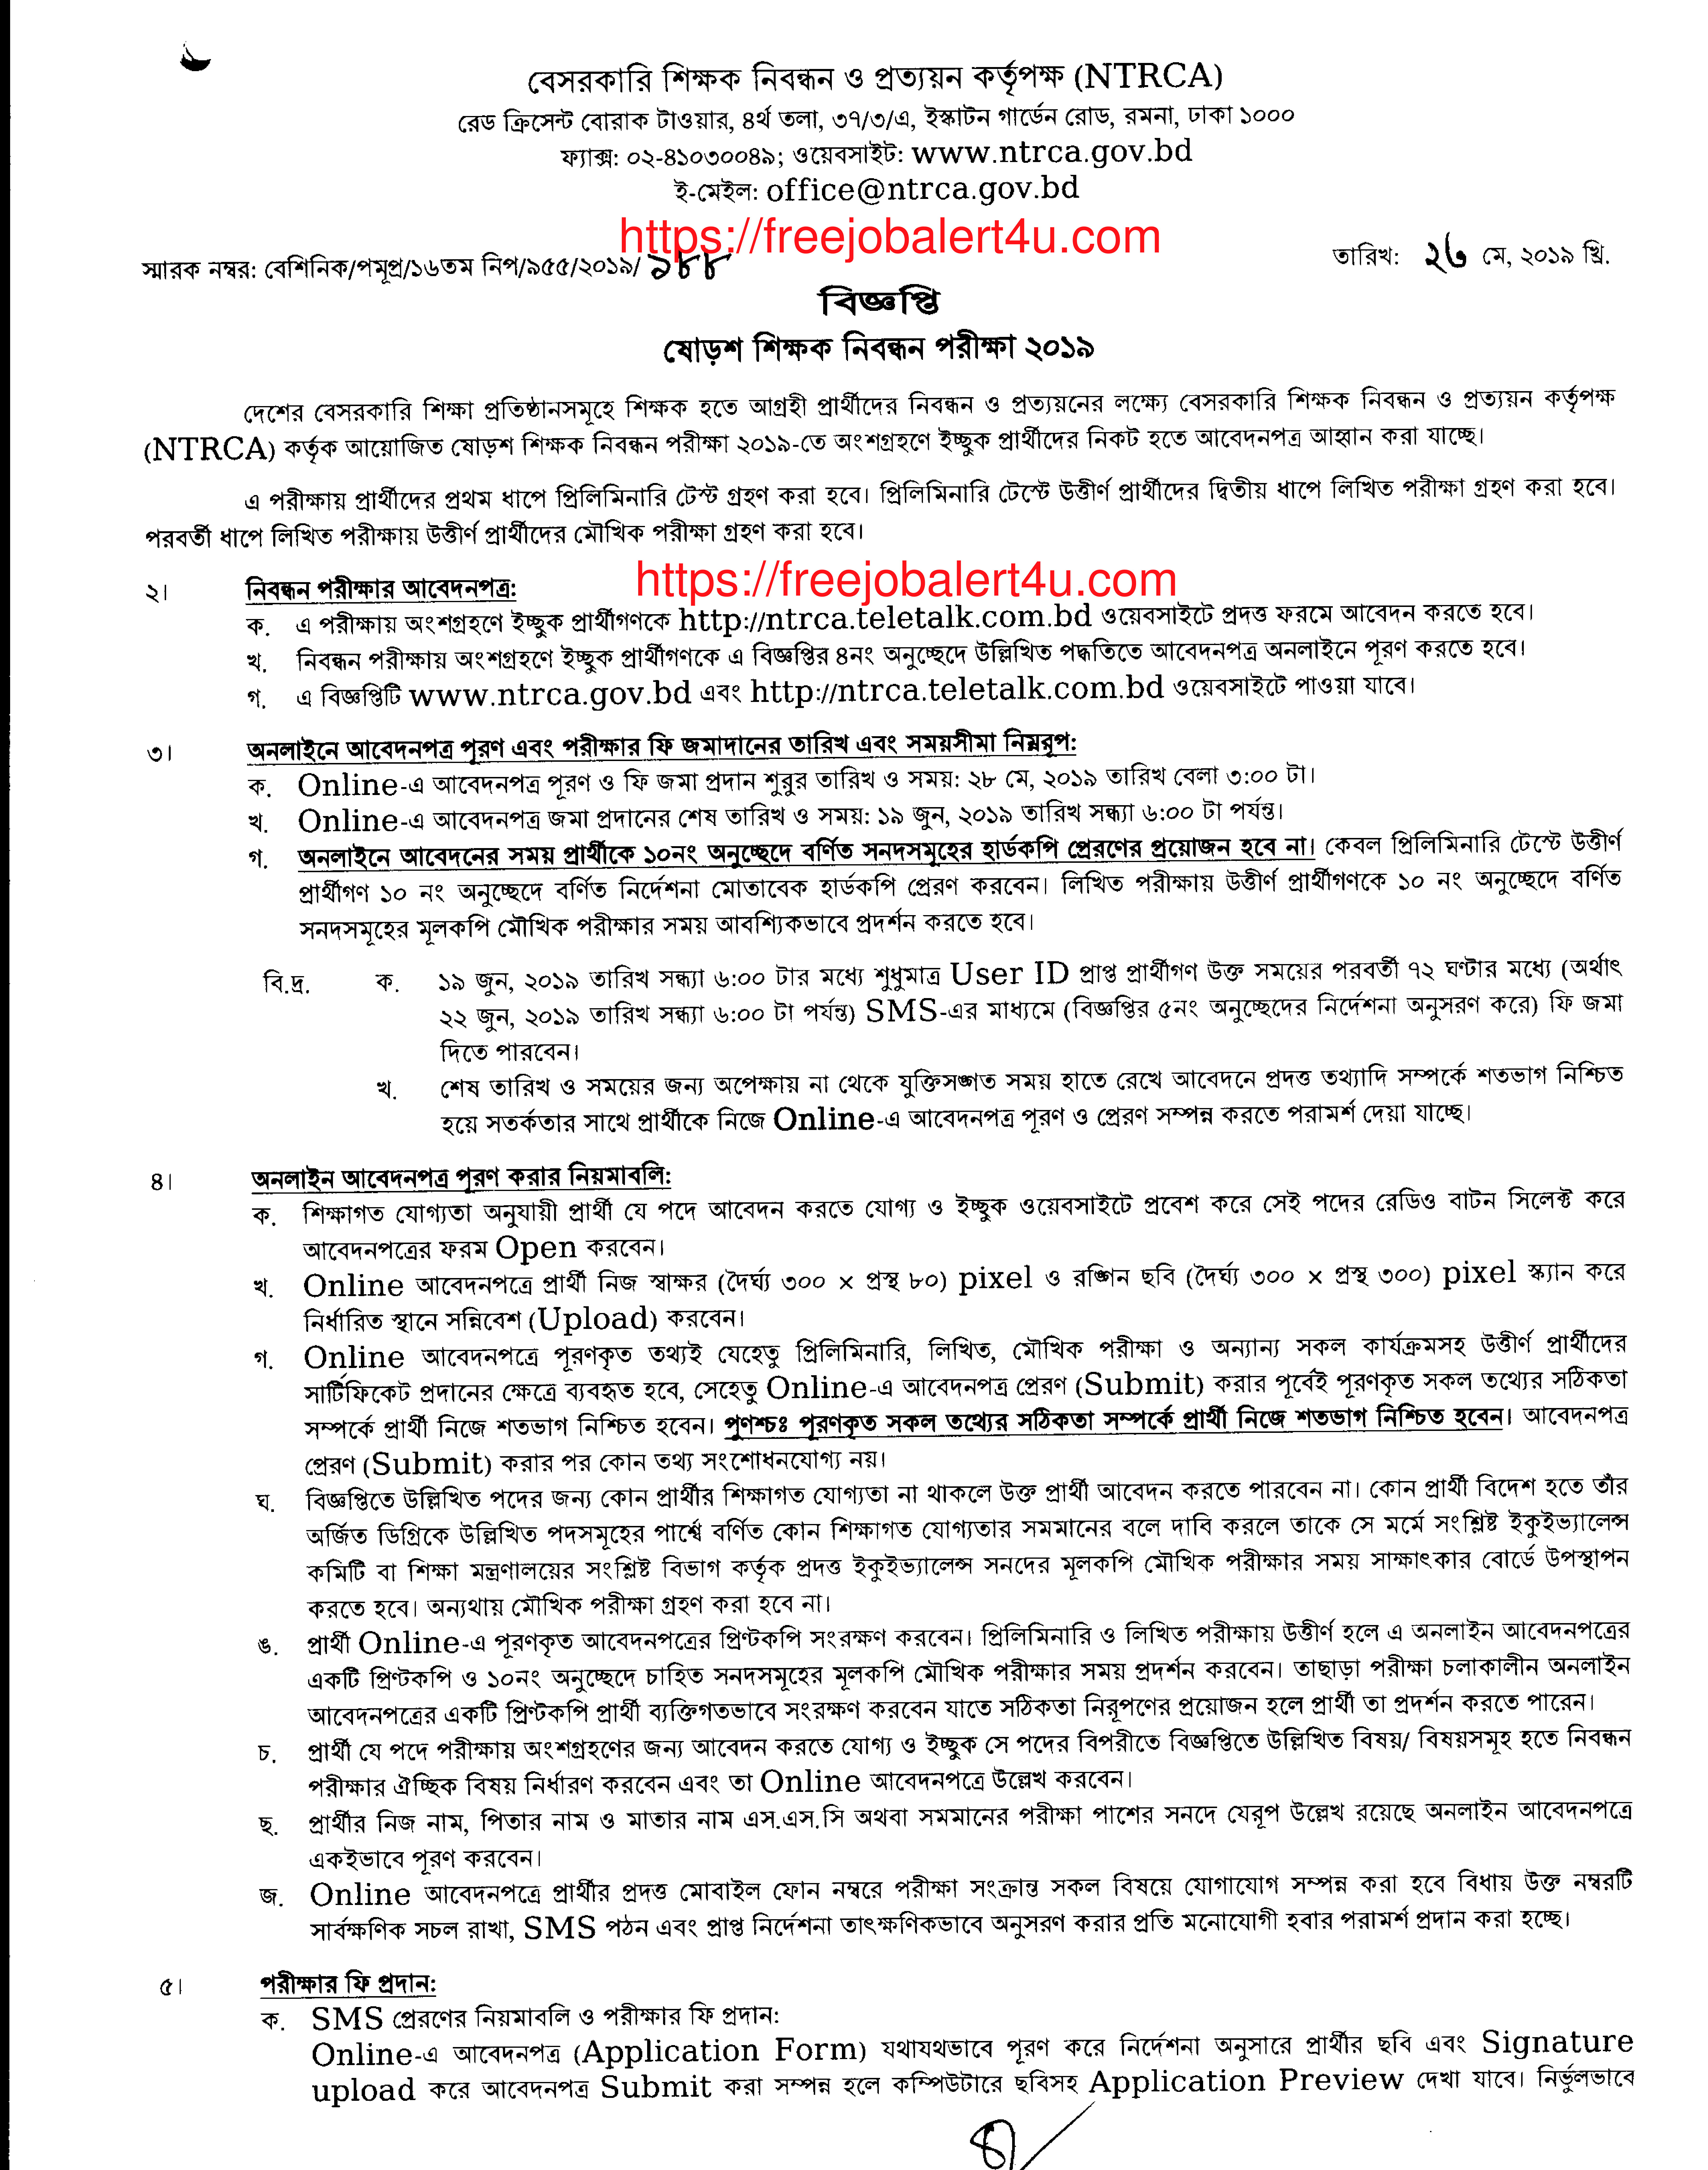 16th Non-government Teachers' Registration & Certification Authority (NTRCA) Circular 2019